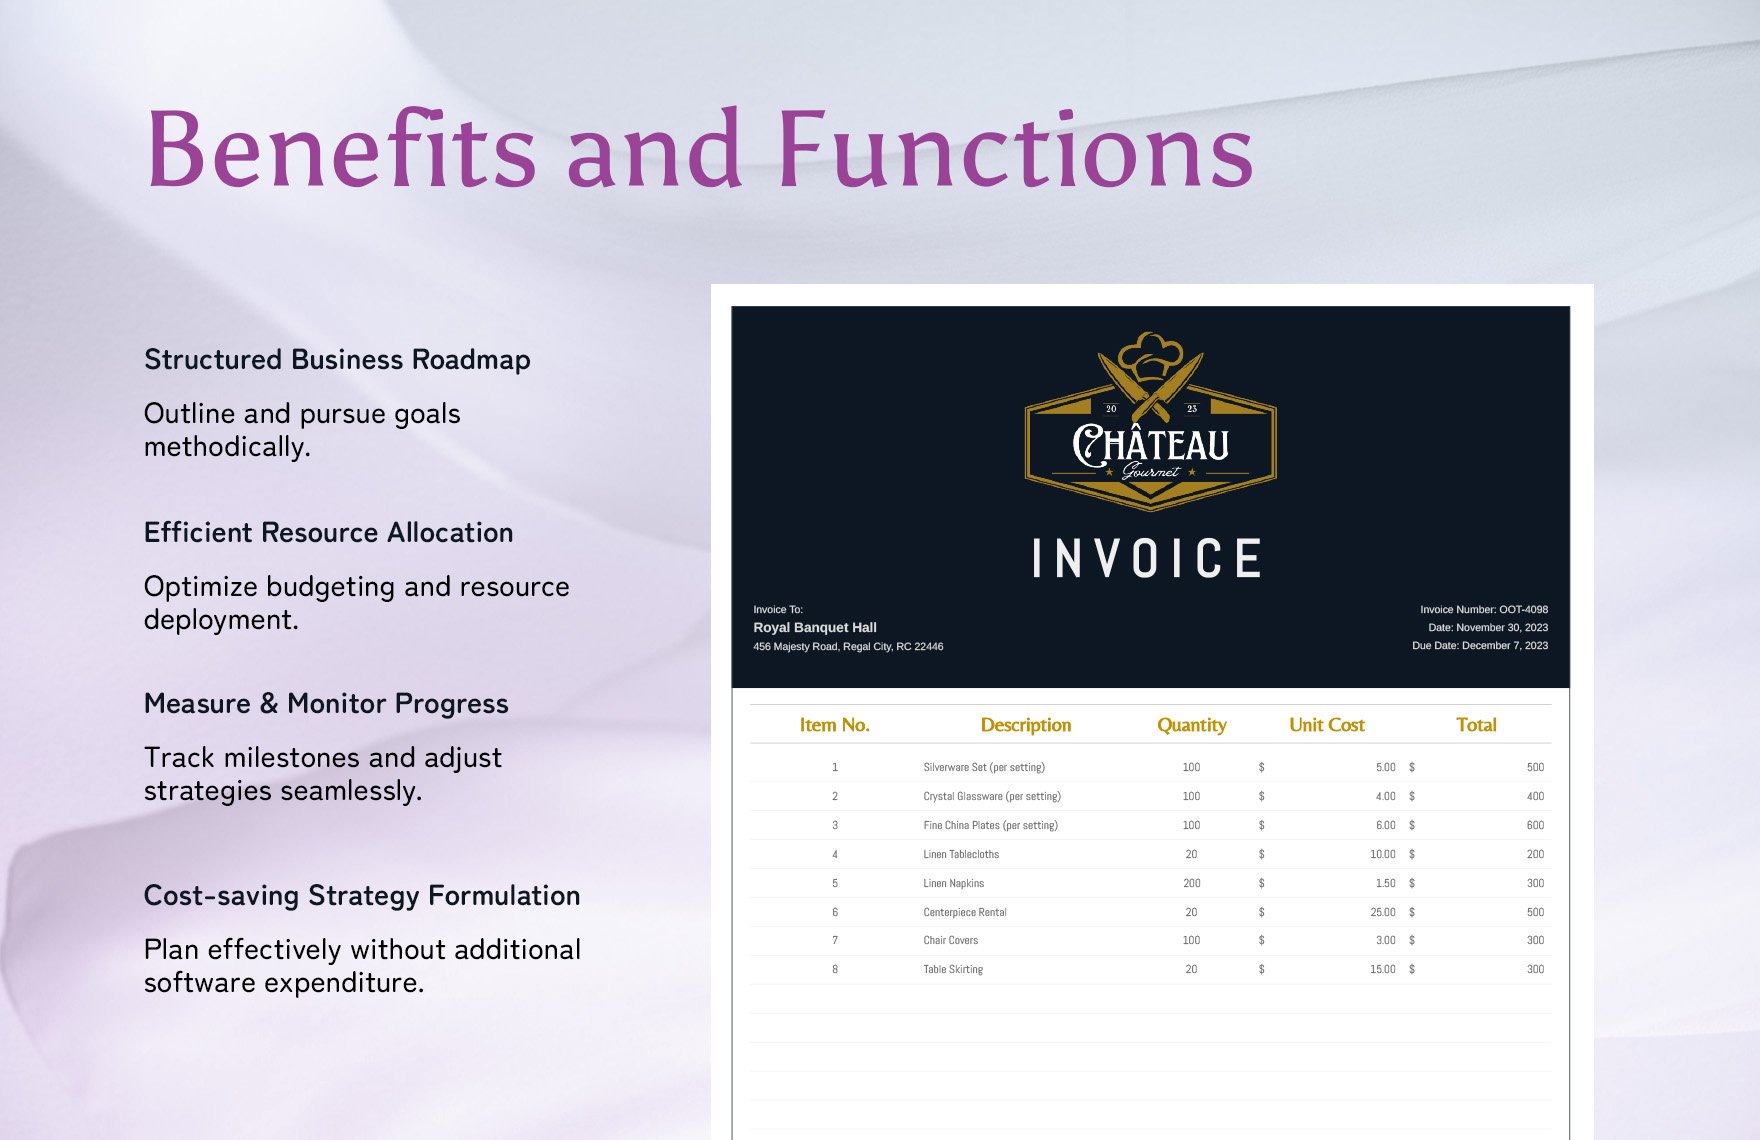 Table Service Invoice Template